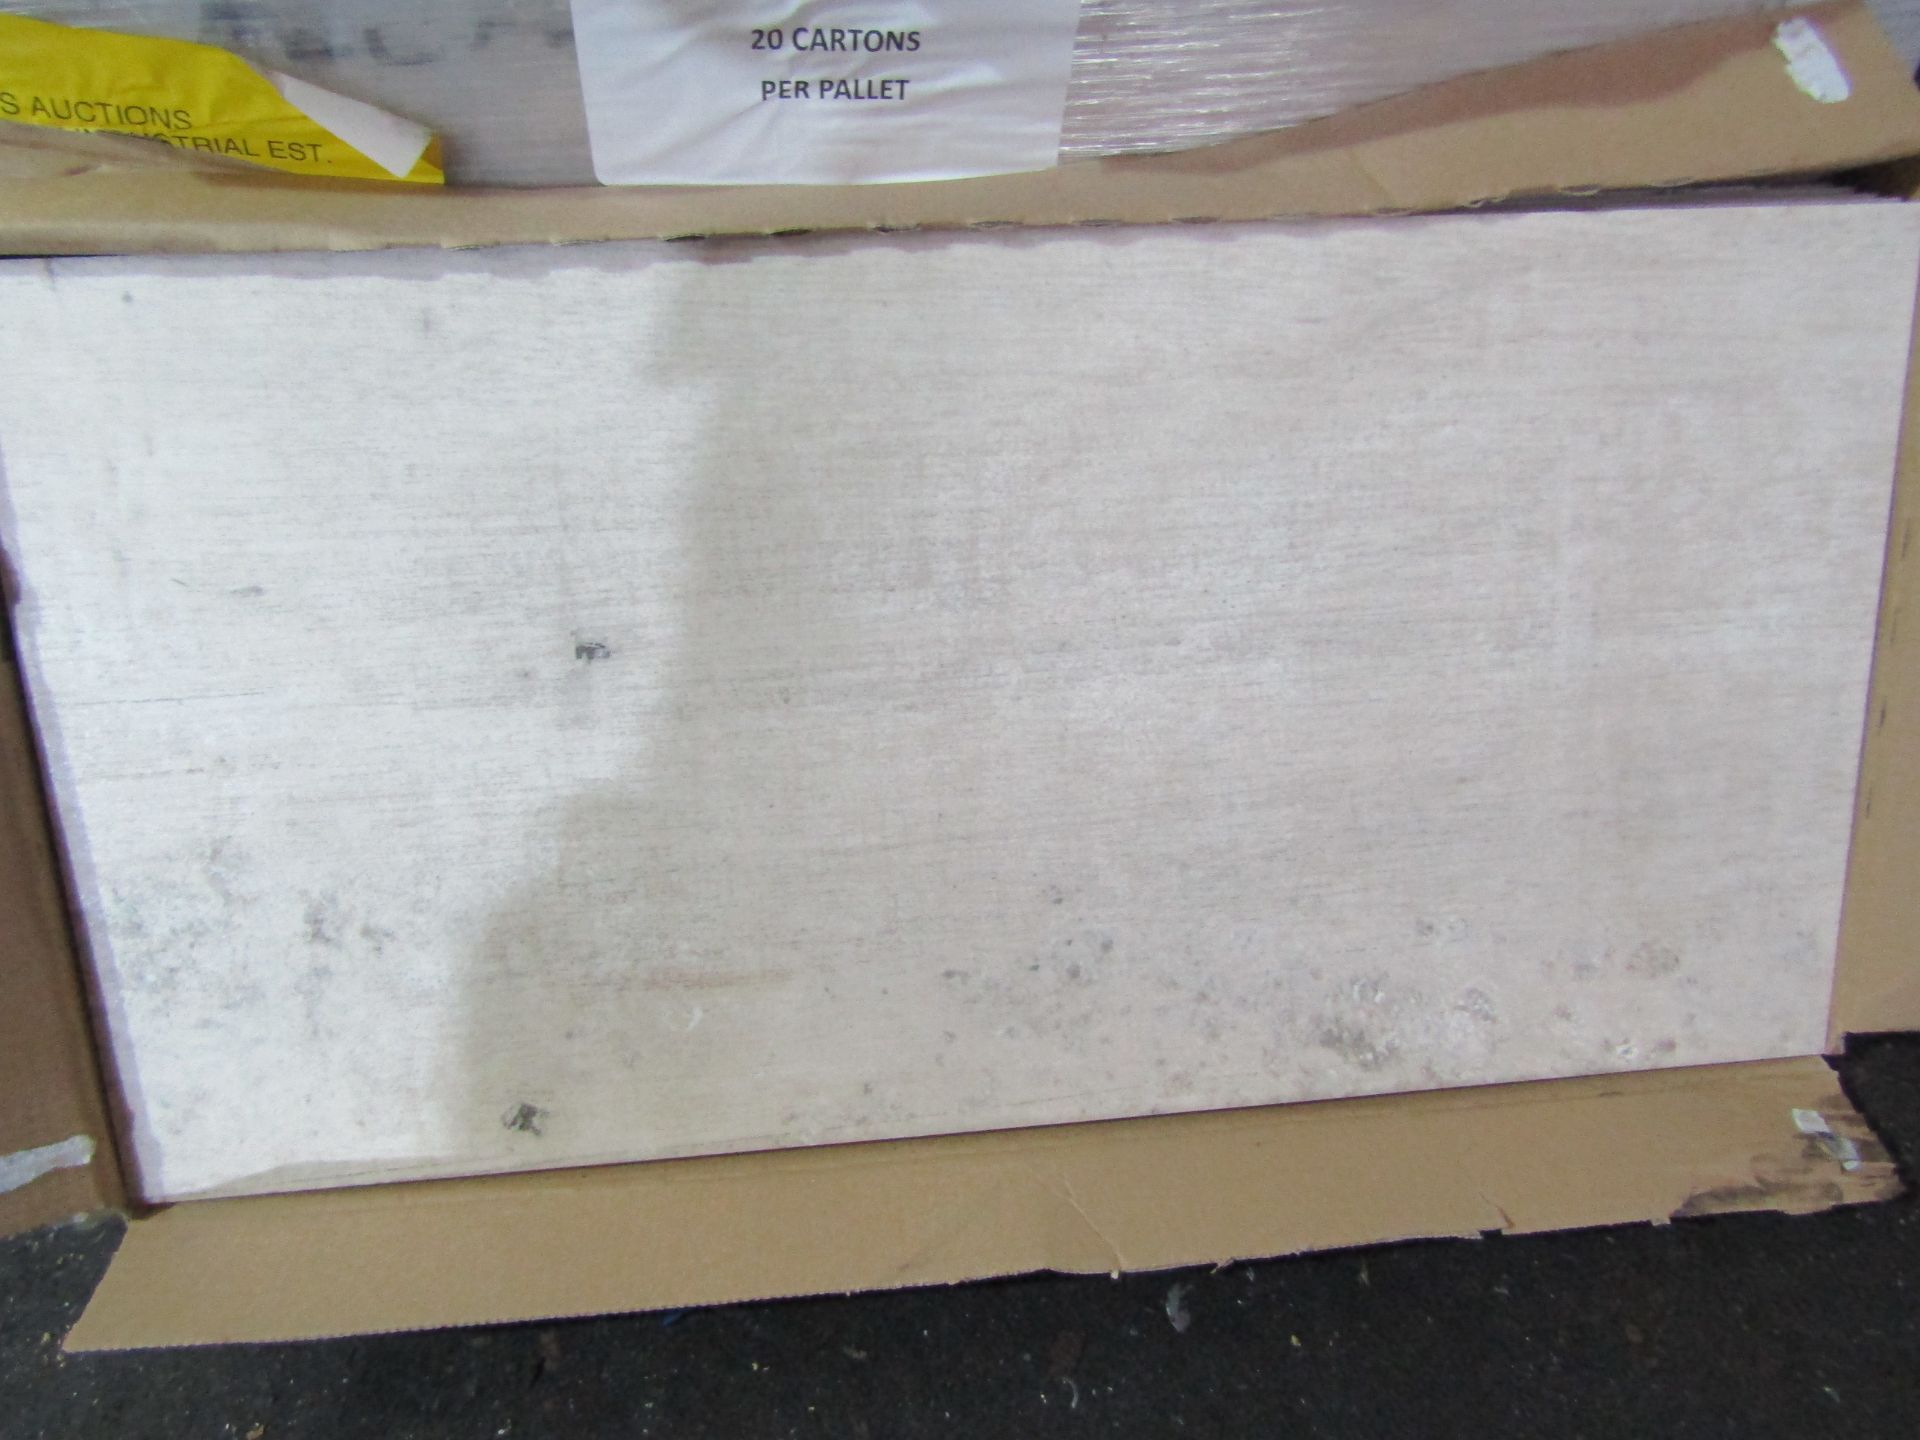 1X Pallet Containing 20x Packs of 5 Wickes 600x300mm Cabin Tawny Beige Floor and Wall Tiles - - Image 3 of 3